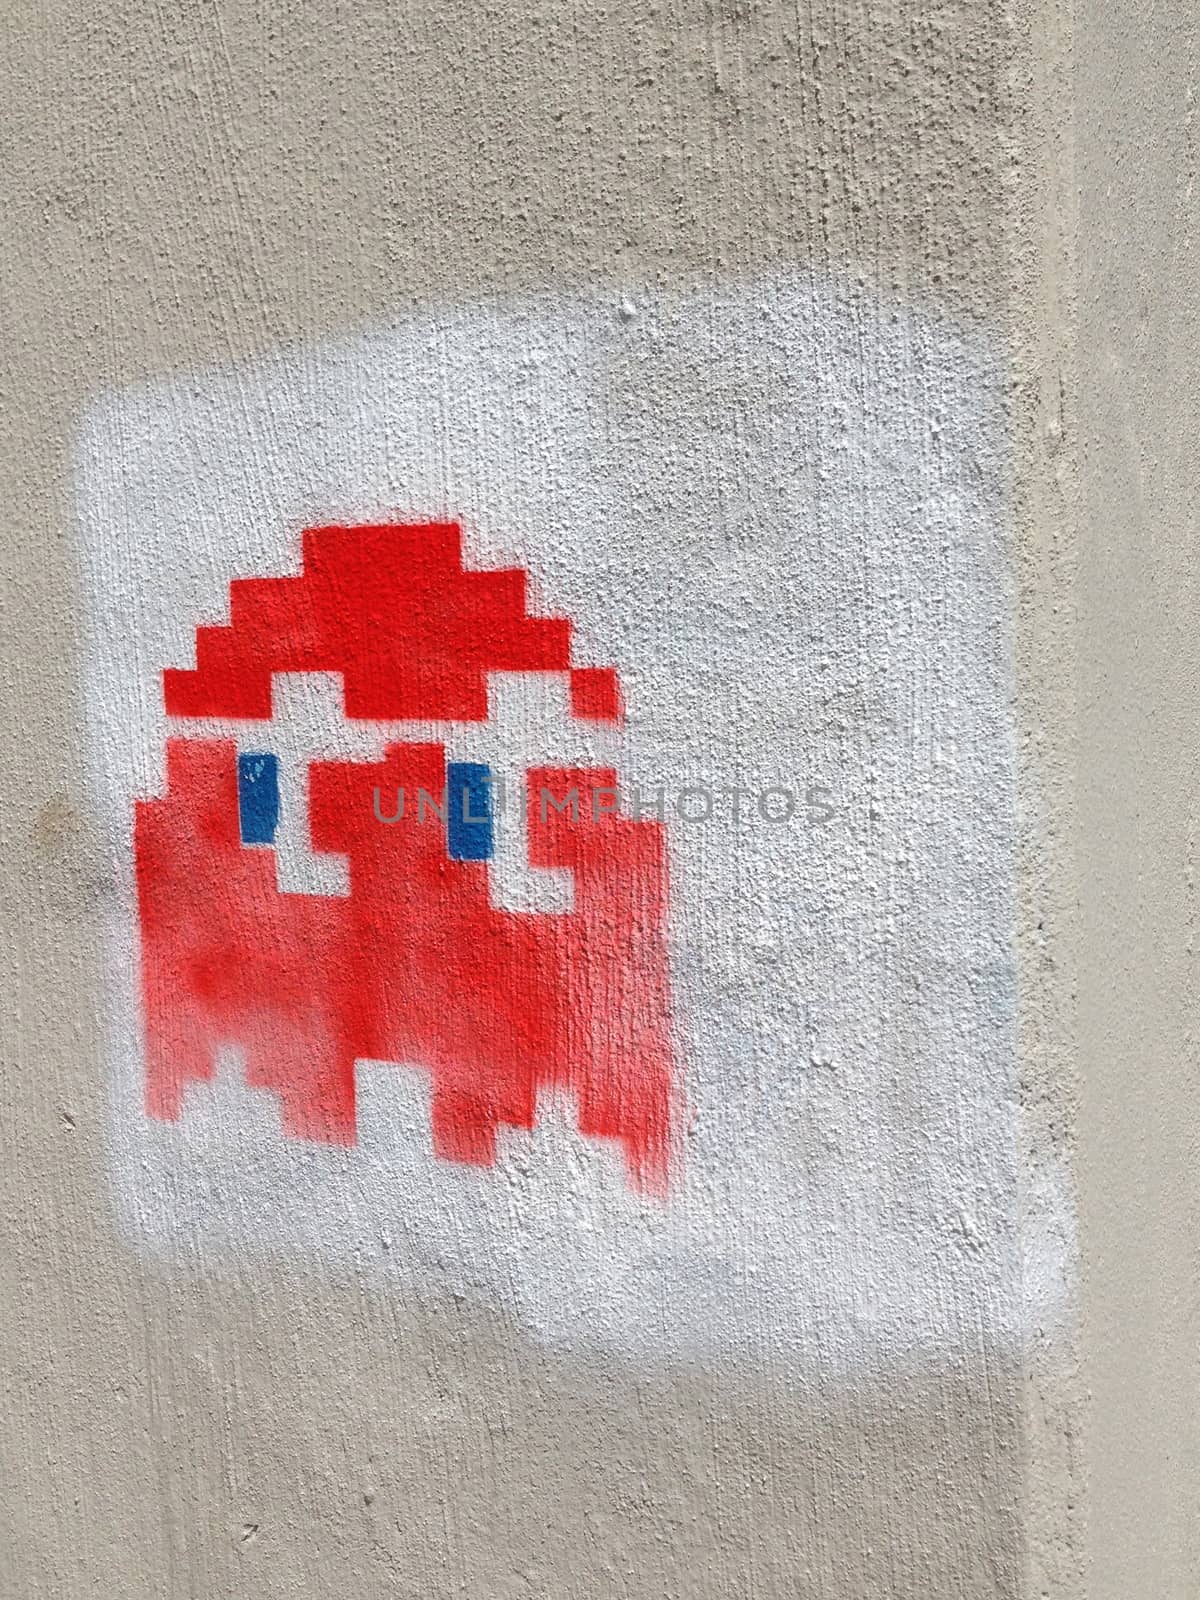 Image of a red Pac Man style graffiti or tag outside of a building.